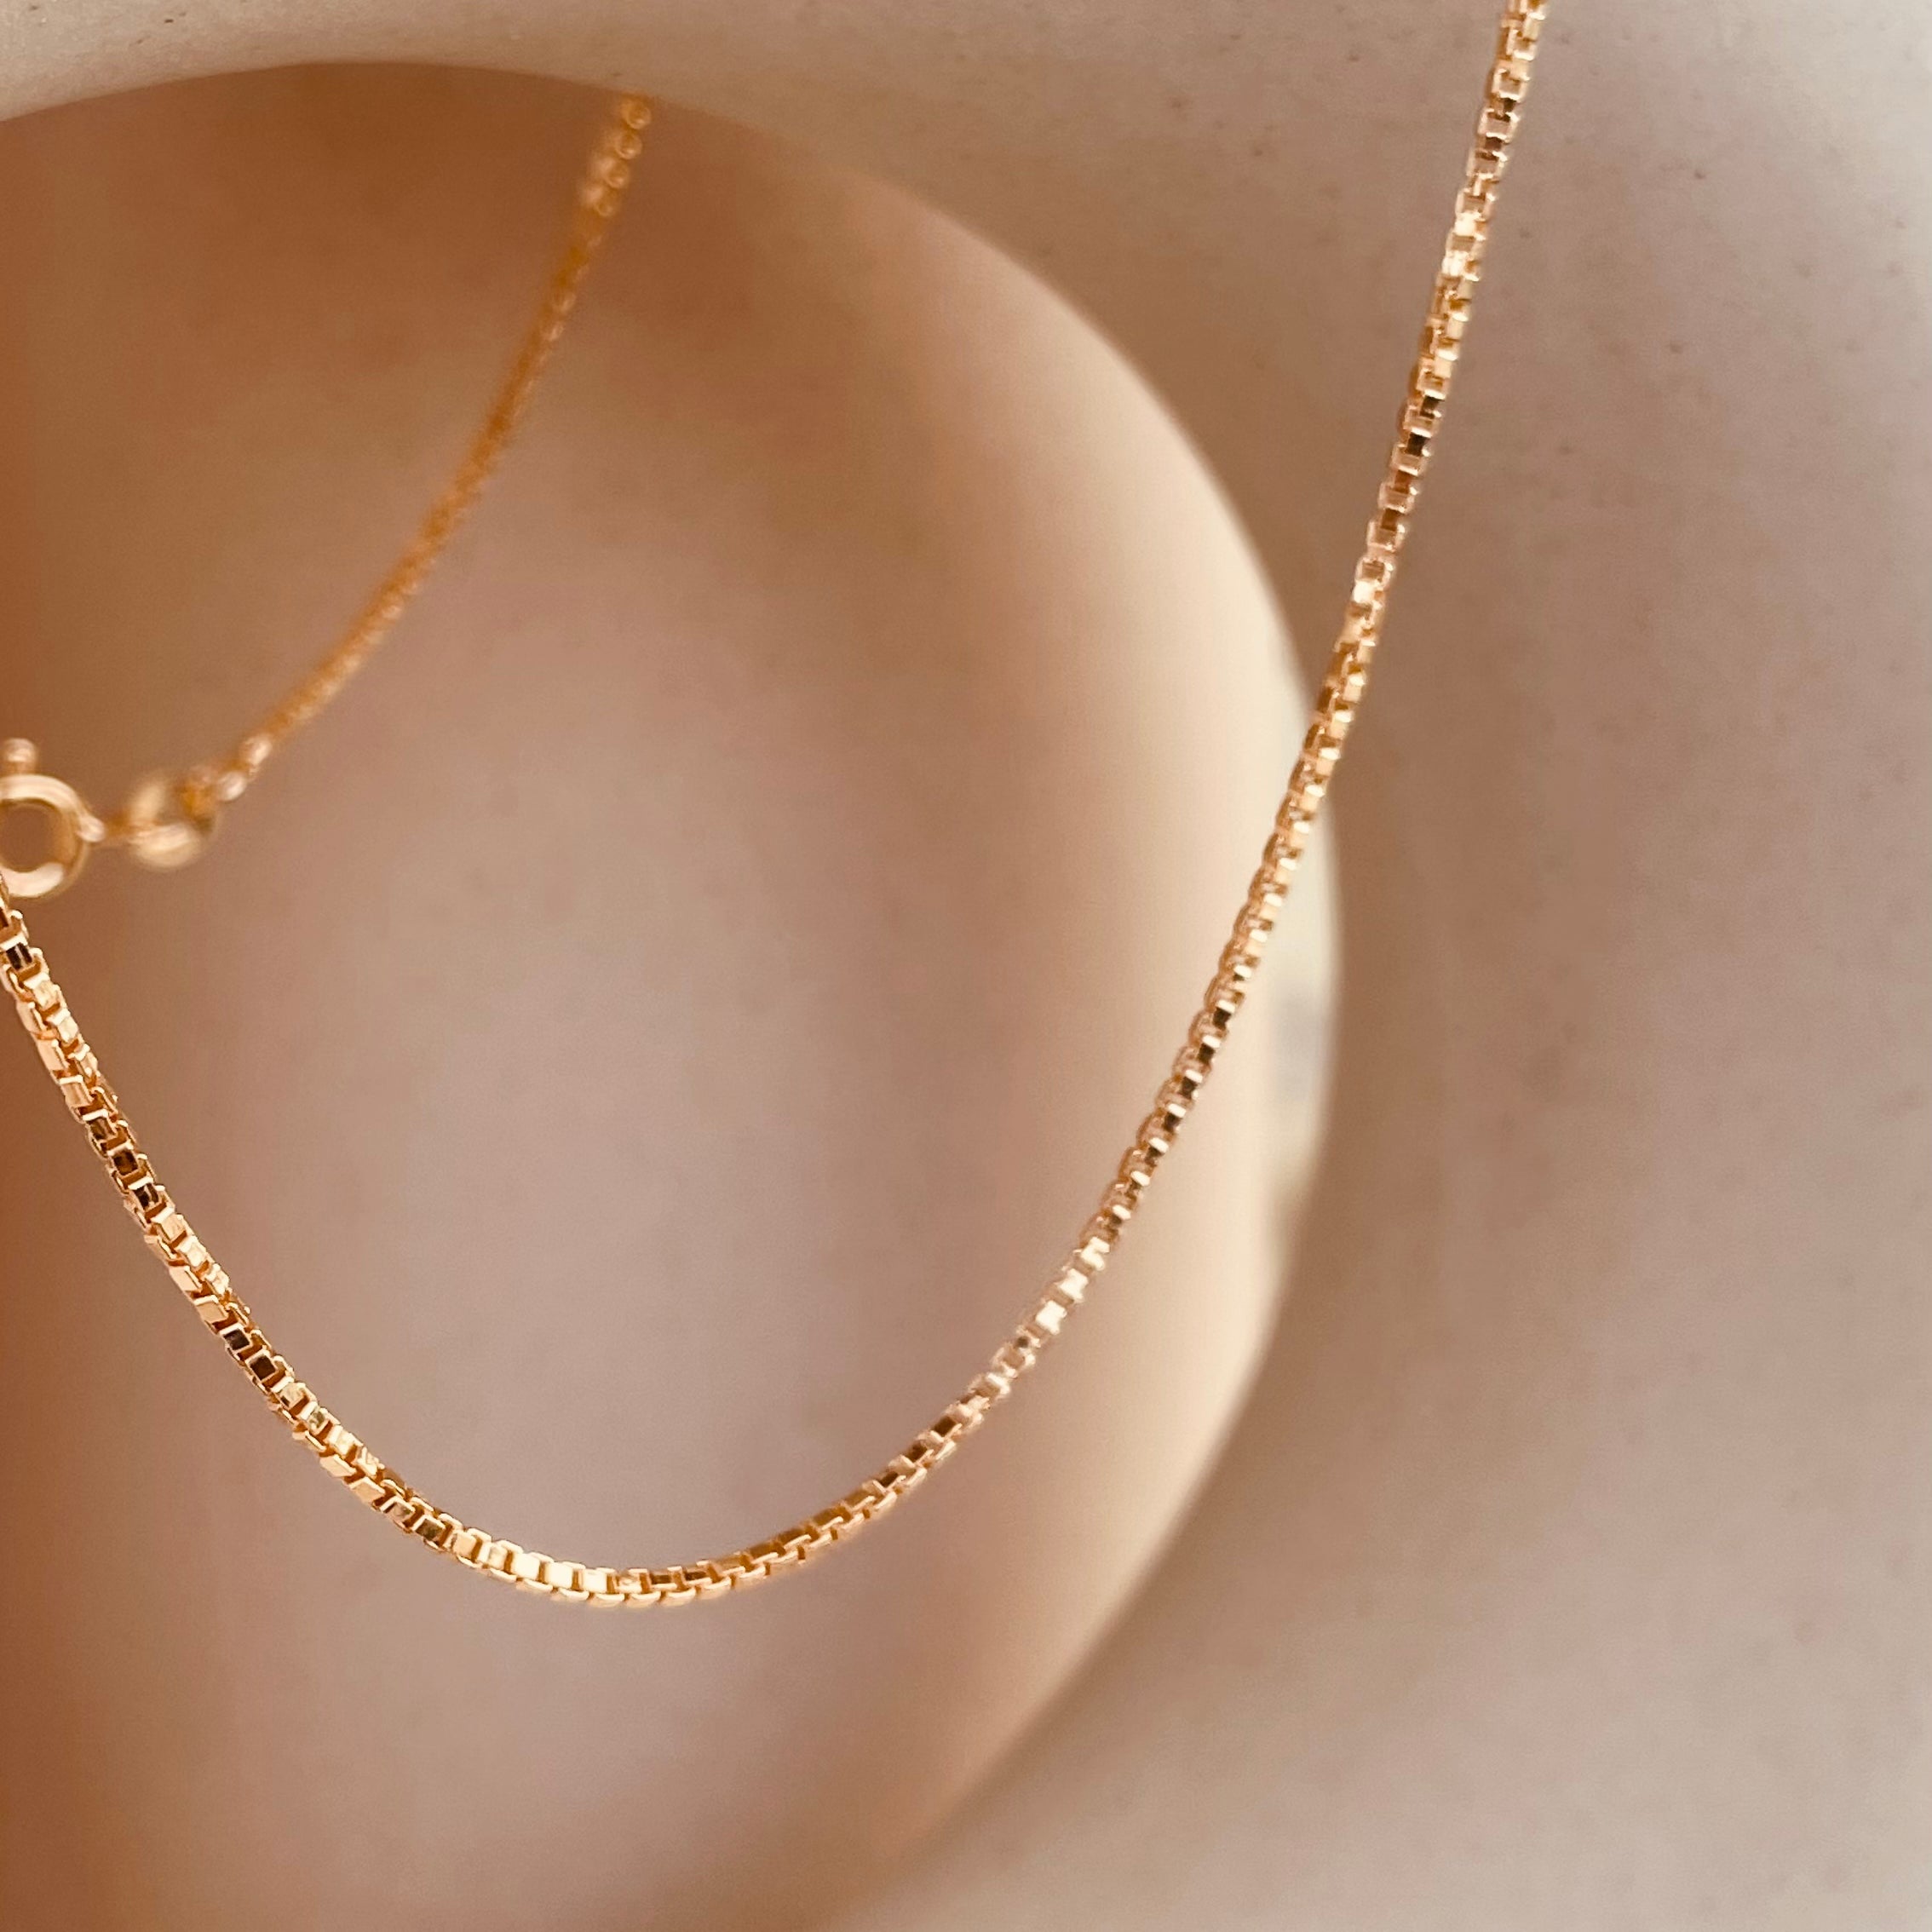 Rose Gold Box Chain Necklace - Octonov 